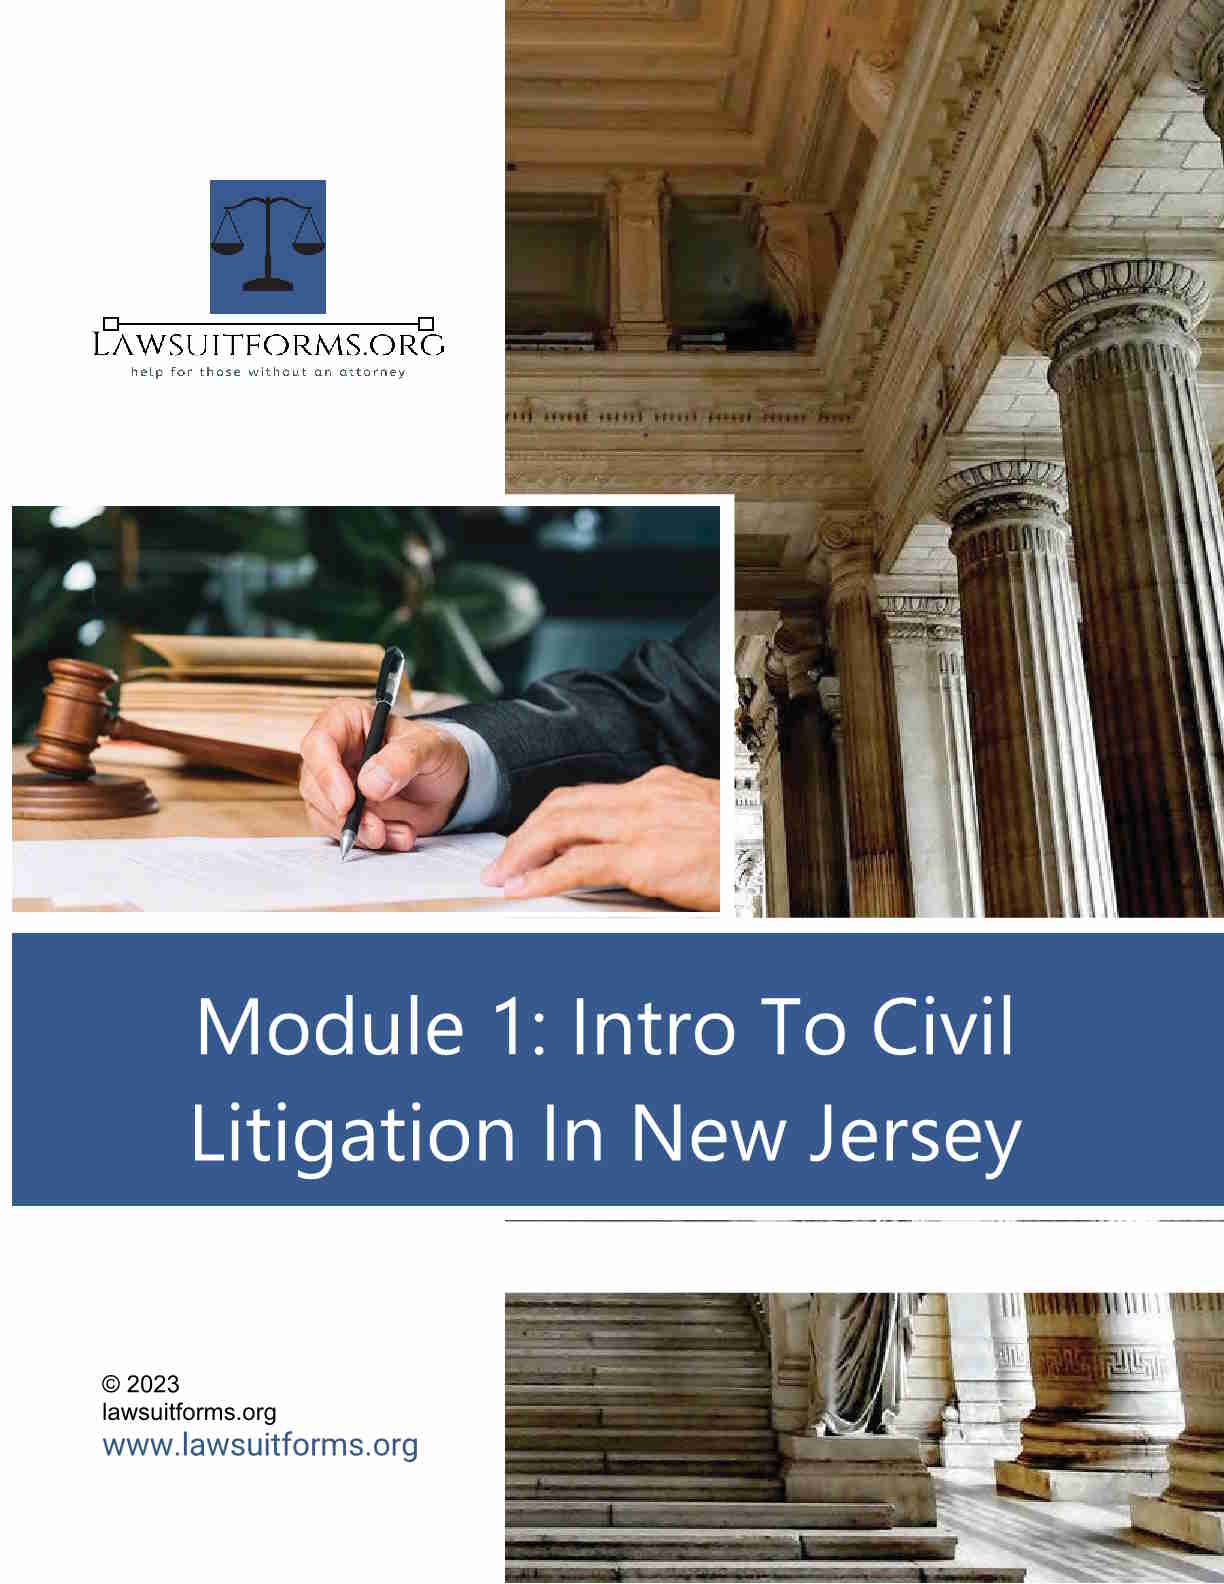 How to file or answer a lawsuit in New Jersey